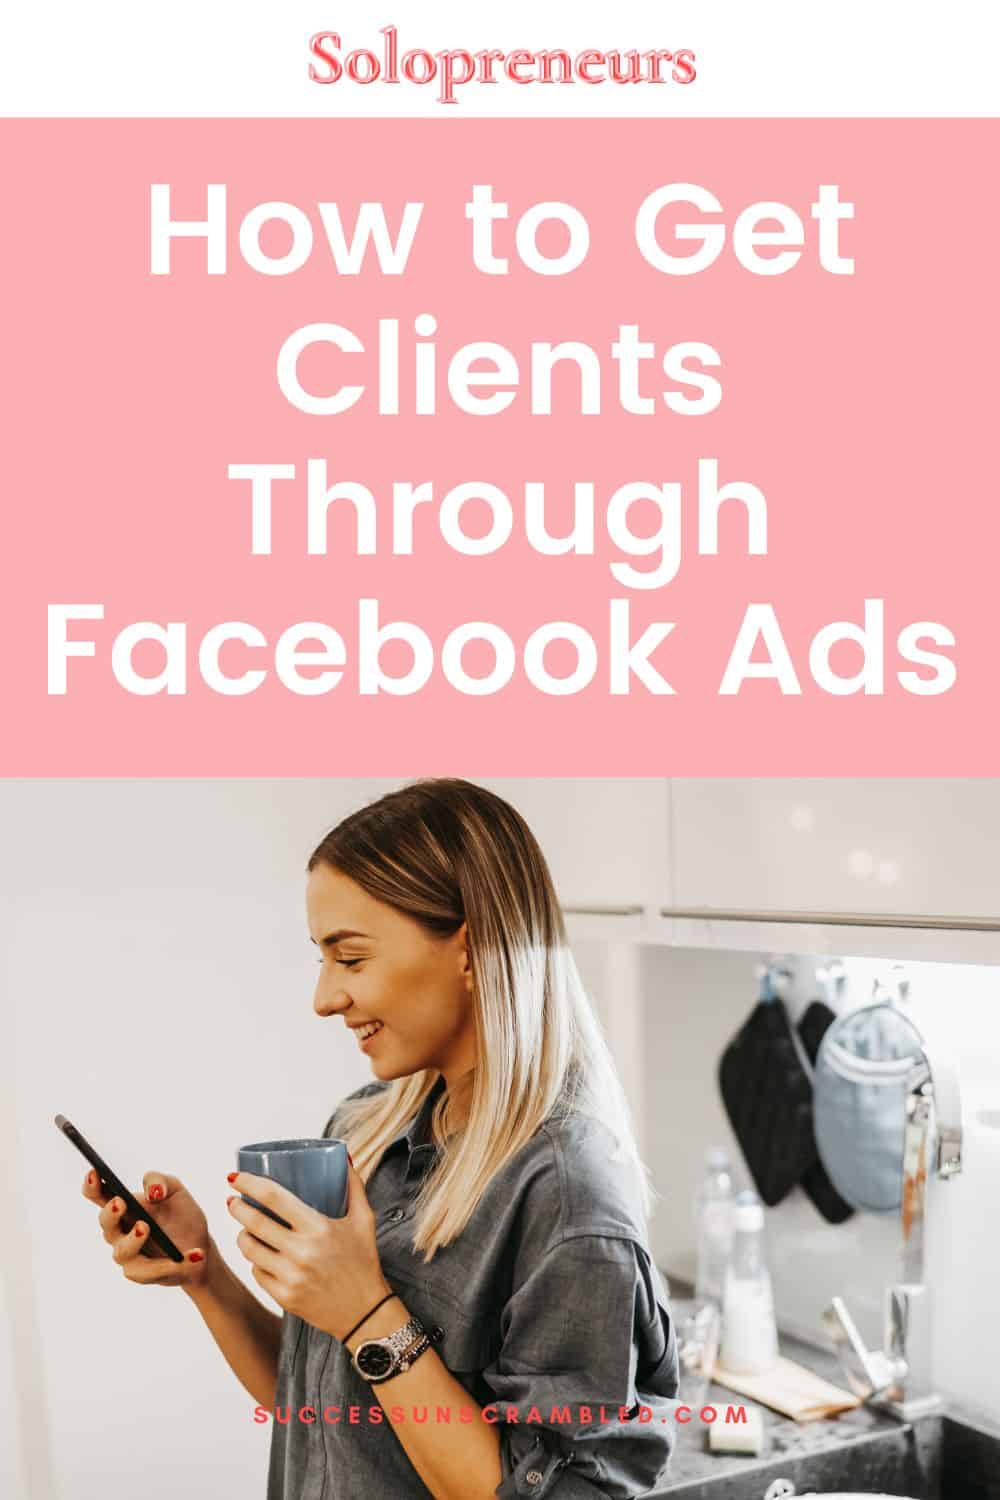 photo of a woman with a smartphone in her hand learning how to get clients through Facebook ads